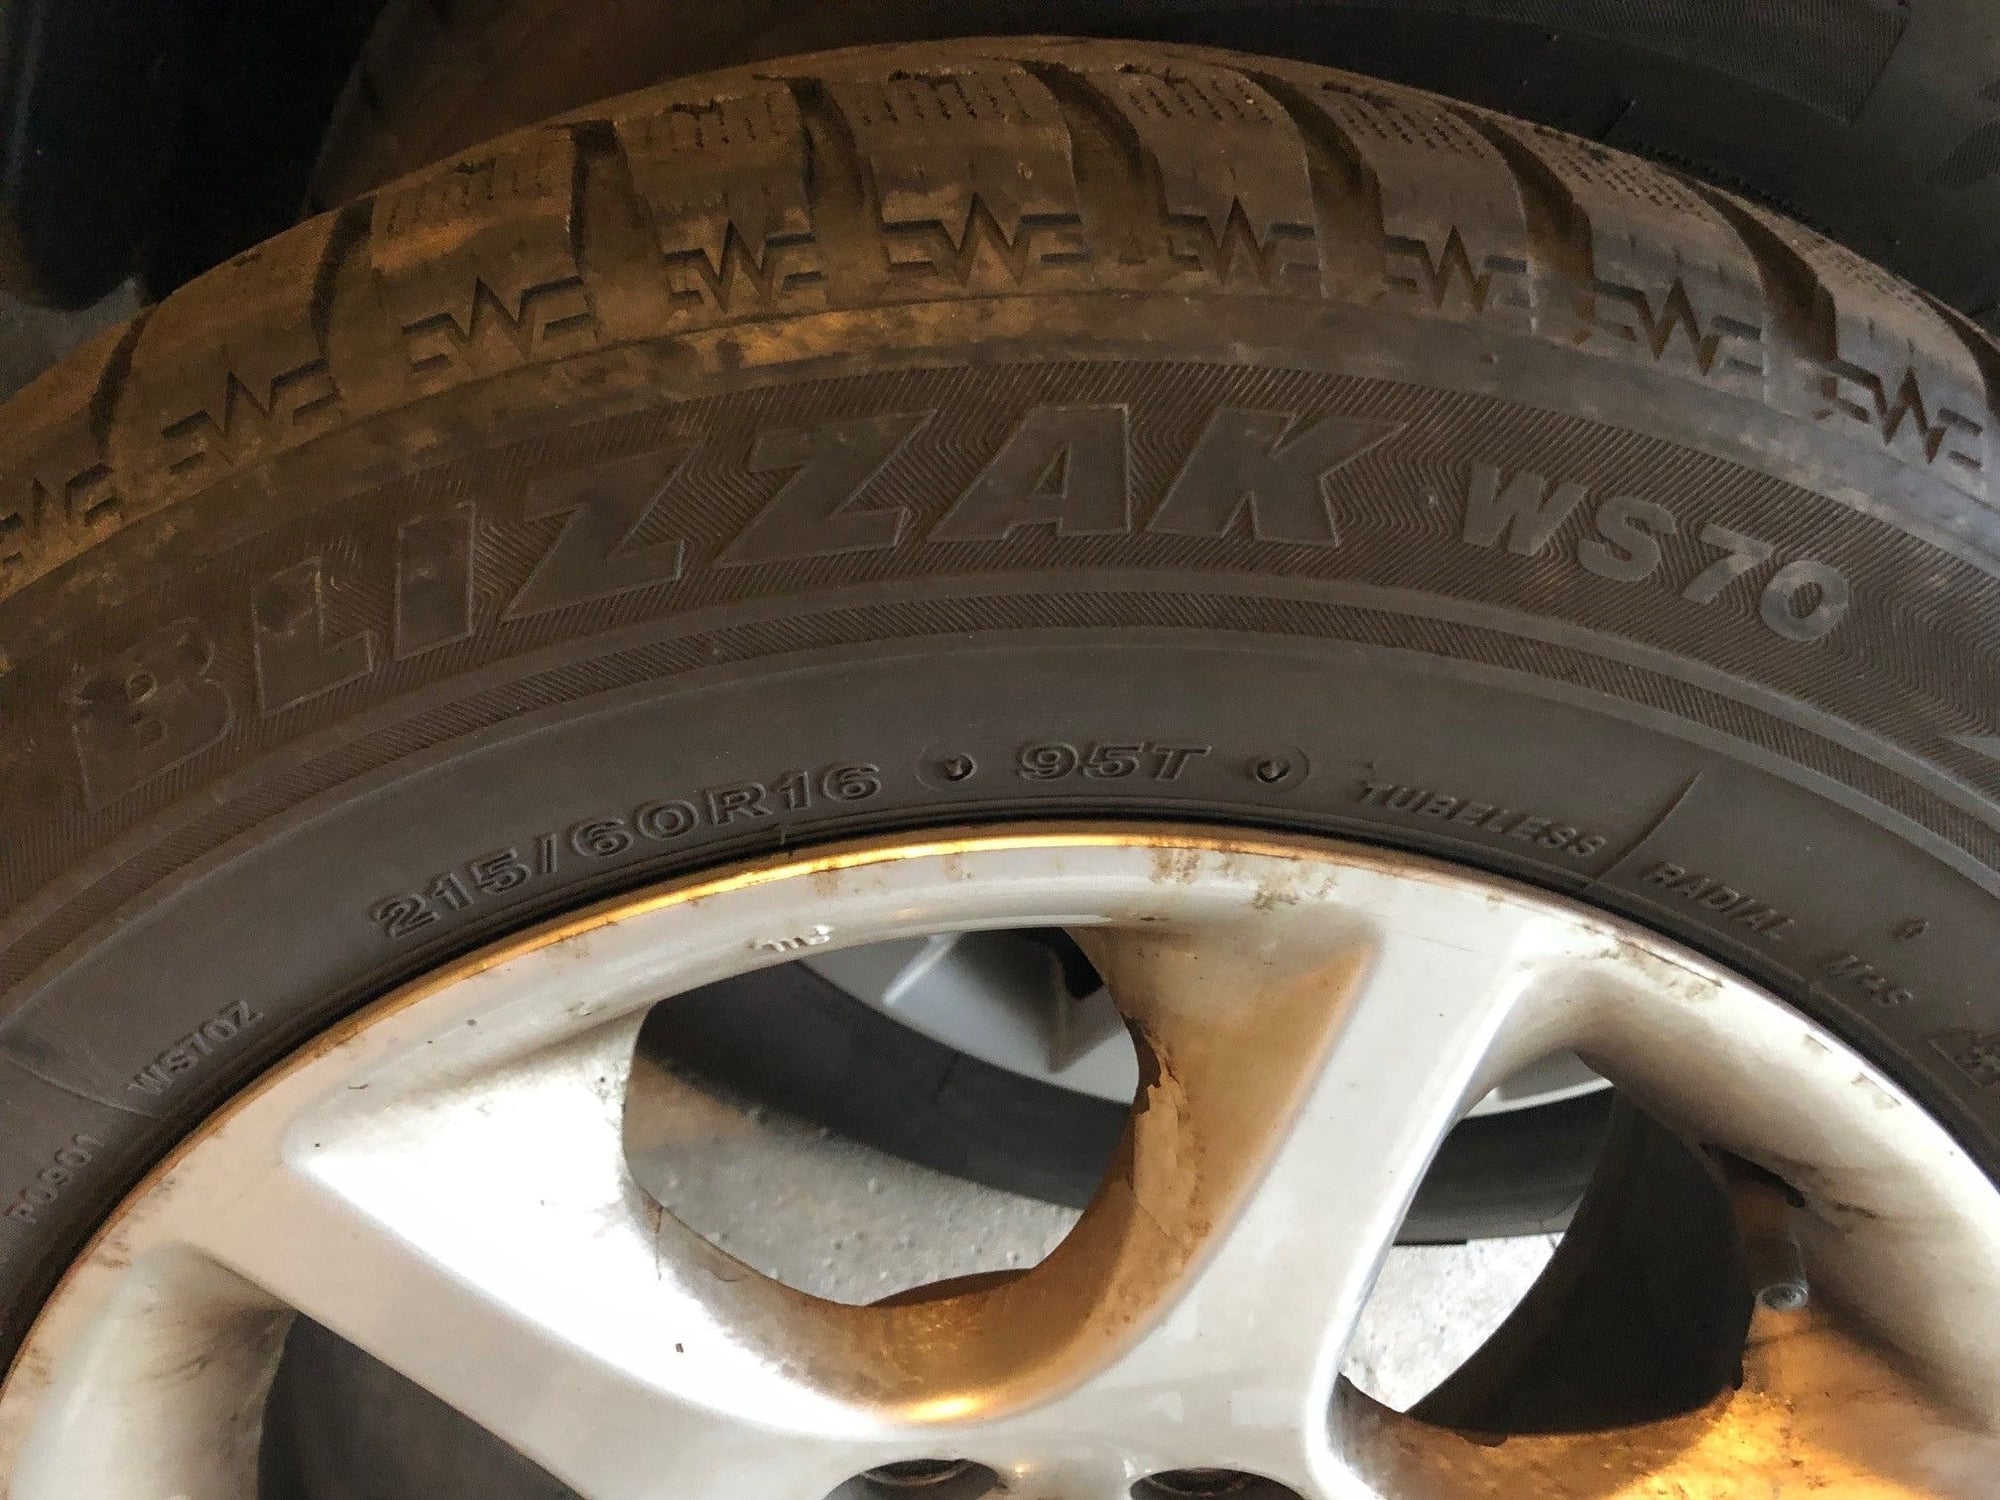 Wheels and Tires/Axles - IL 2004 Lexus GS 300 16 Inch Wheels and Blizzak Winter Tires 215/60/16 - Used - Northbrook, IL 60062, United States